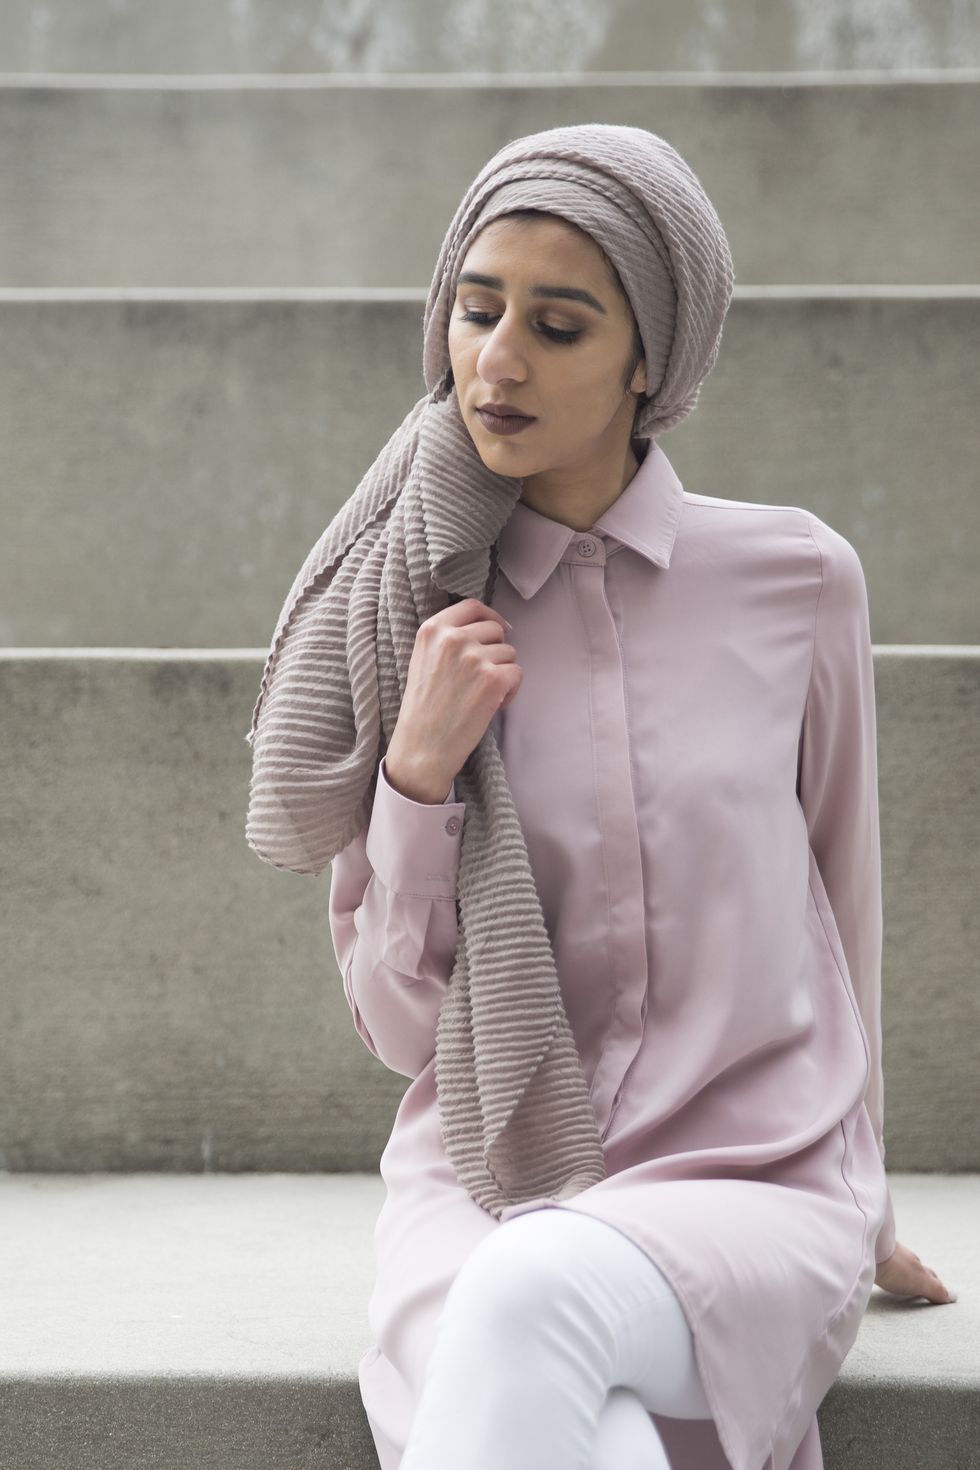 Macy's to launch modest clothing collection aimed at Muslim and